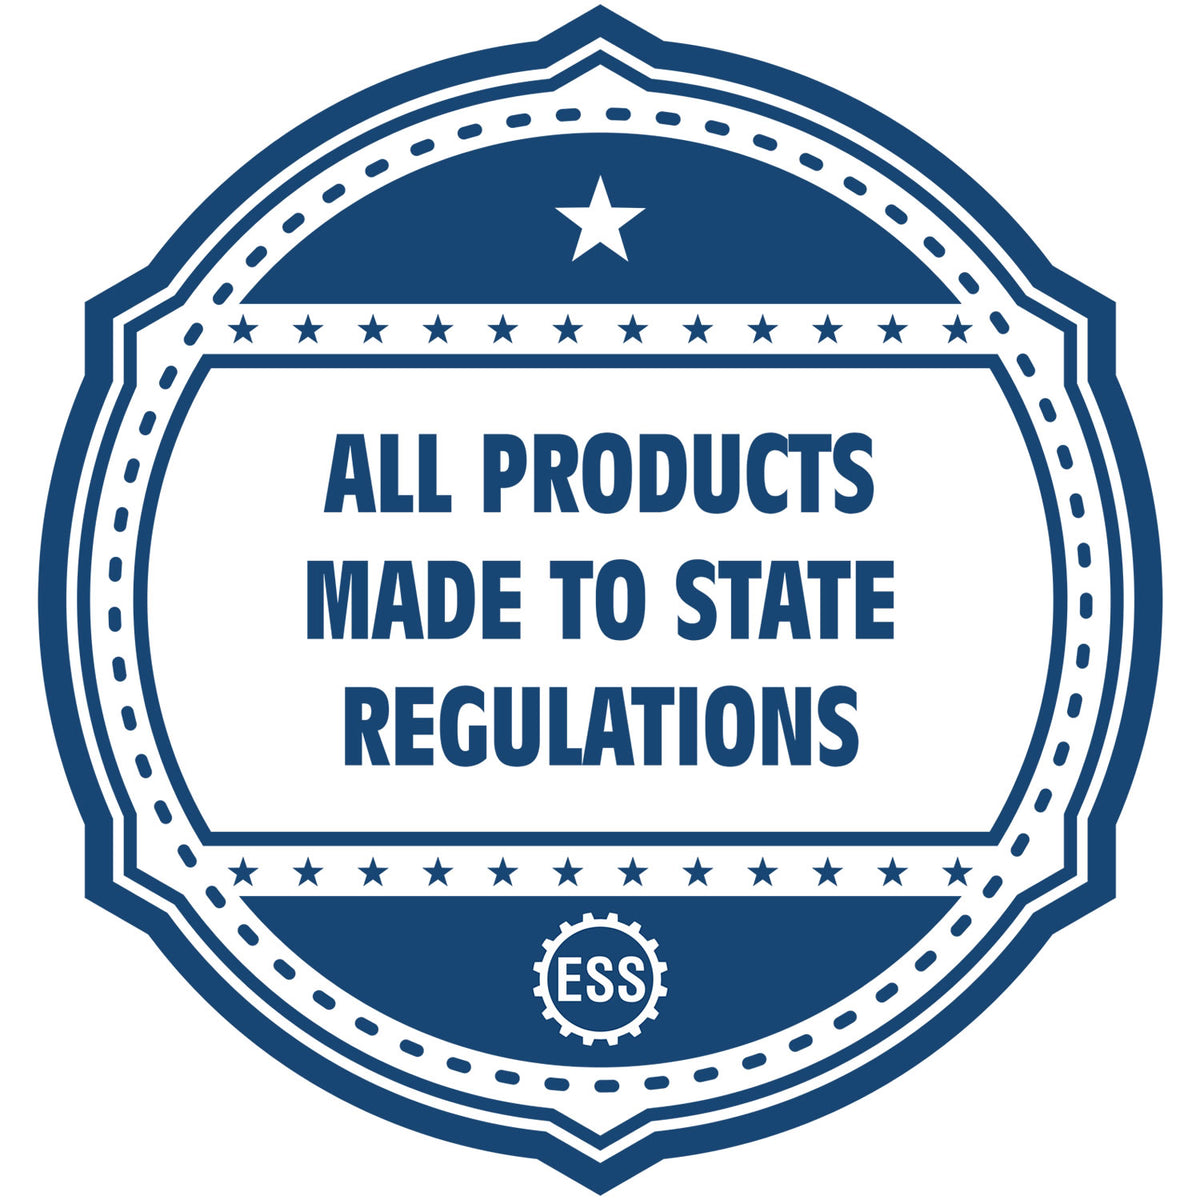 An icon or badge element for the Self-Inking Ohio Landscape Architect Stamp showing that this product is made in compliance with state regulations.